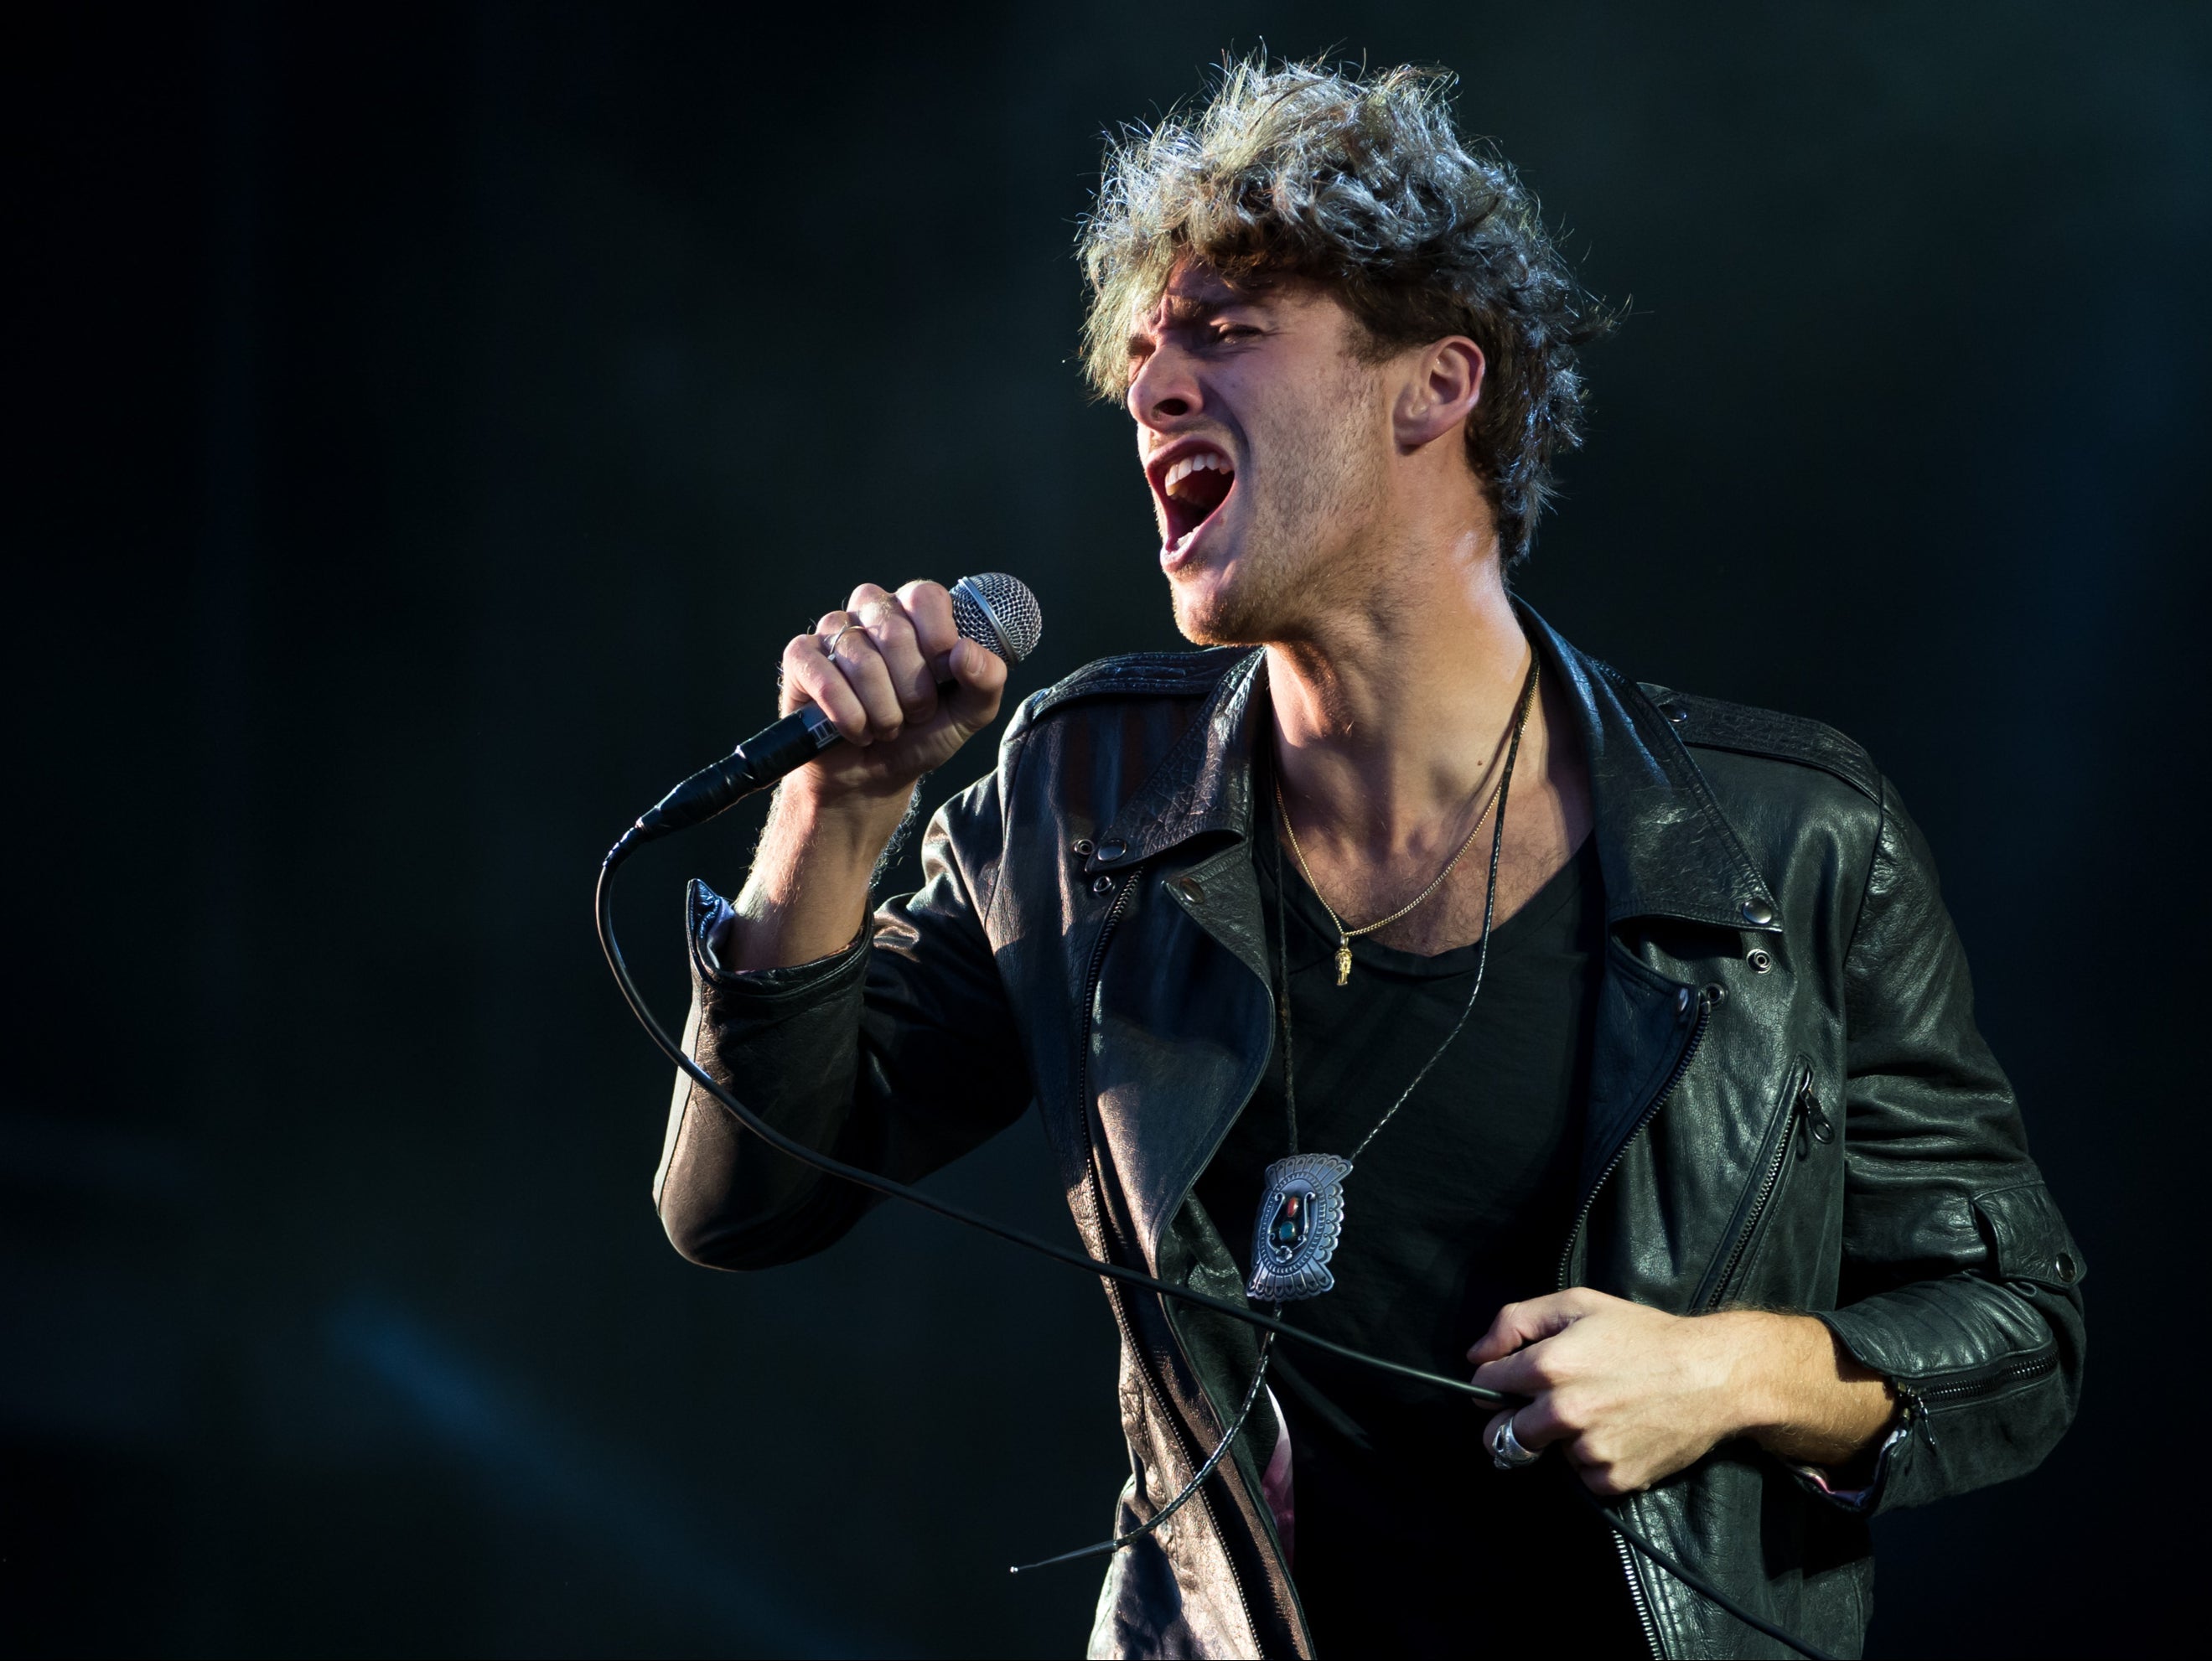 Paolo Nutini is returning to live shows this year